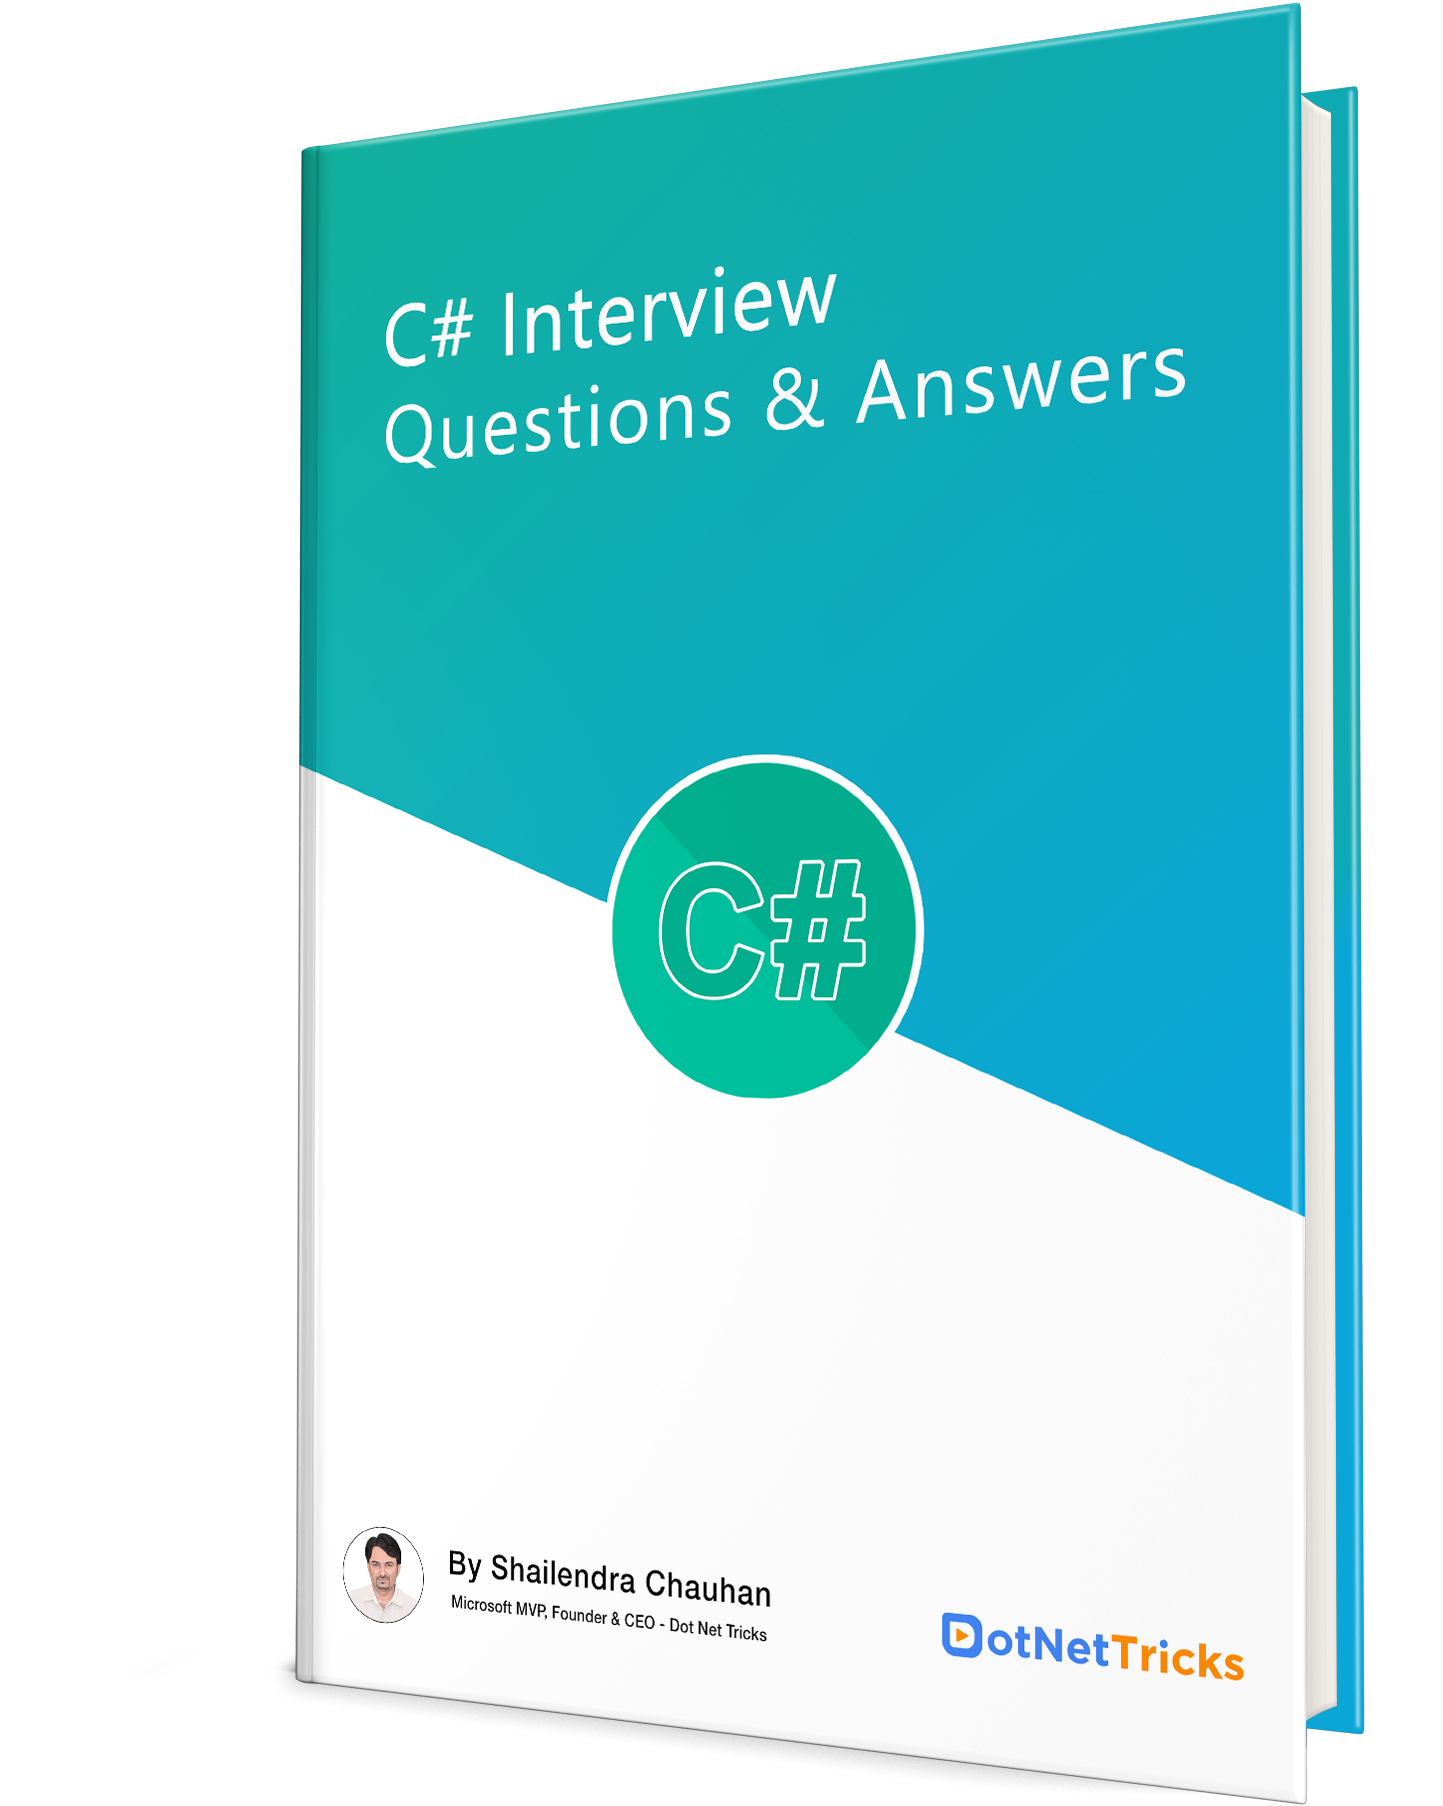  C# Interview Questions & Answers eBook